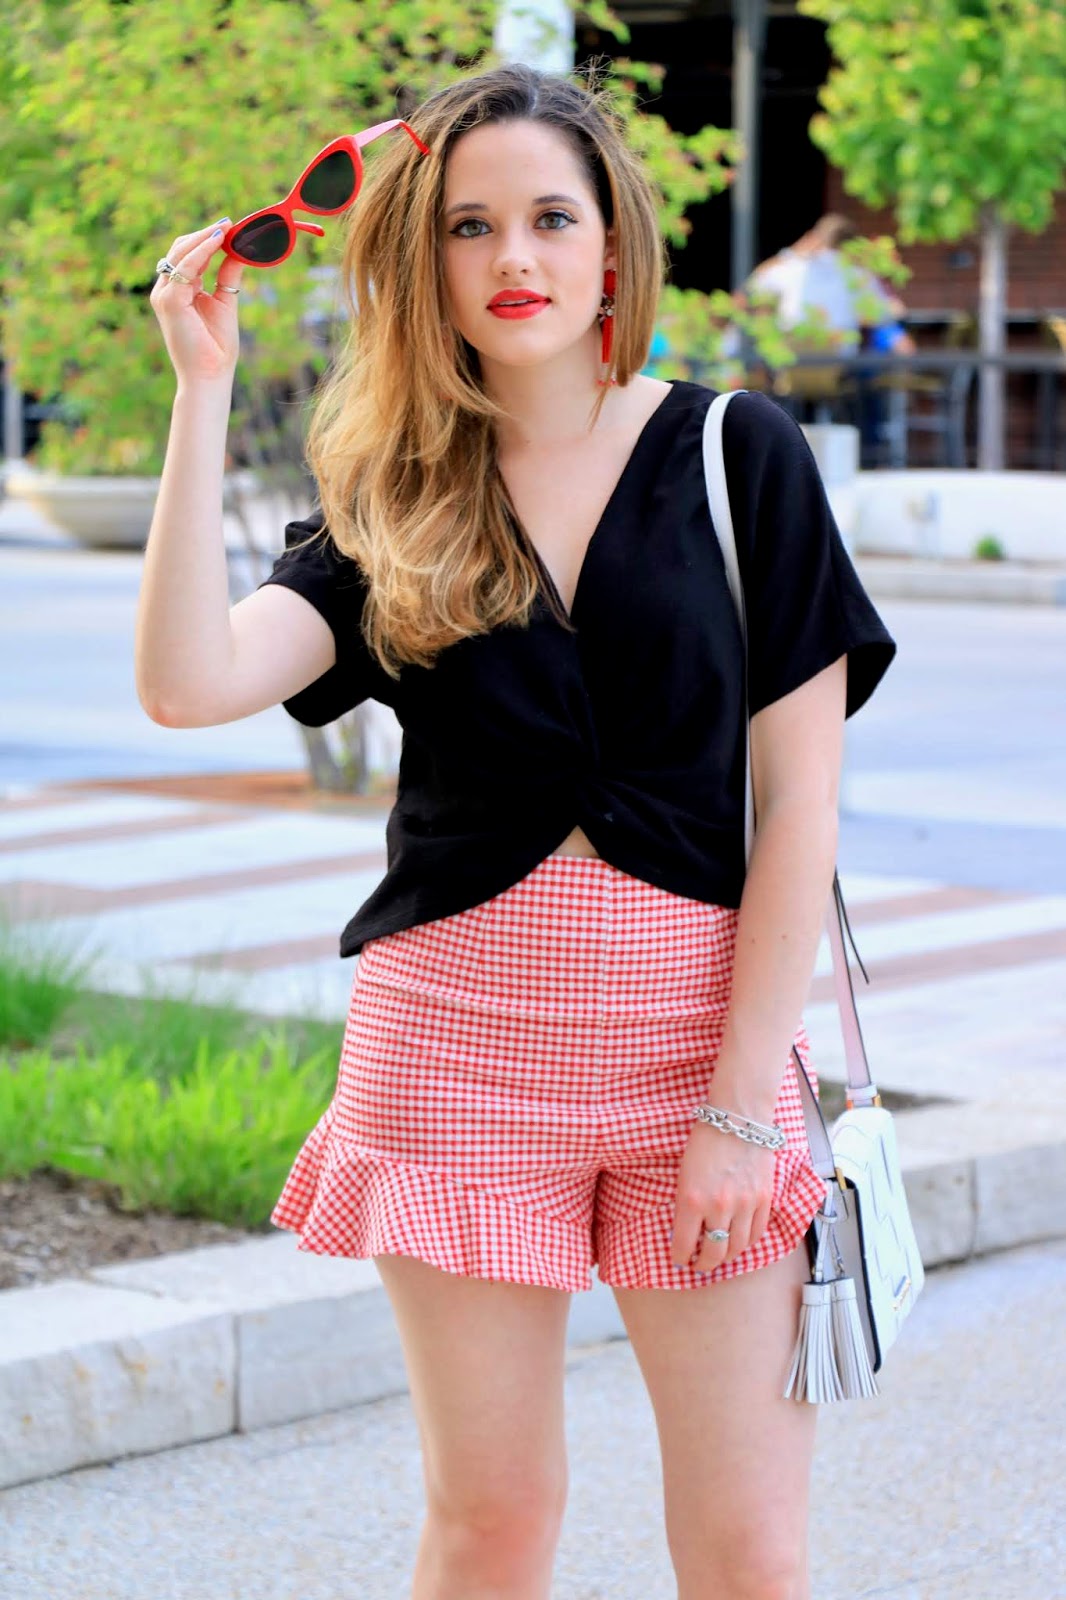 Nyc fashion blogger Kathleen Harper showing how to wear shorts on a date